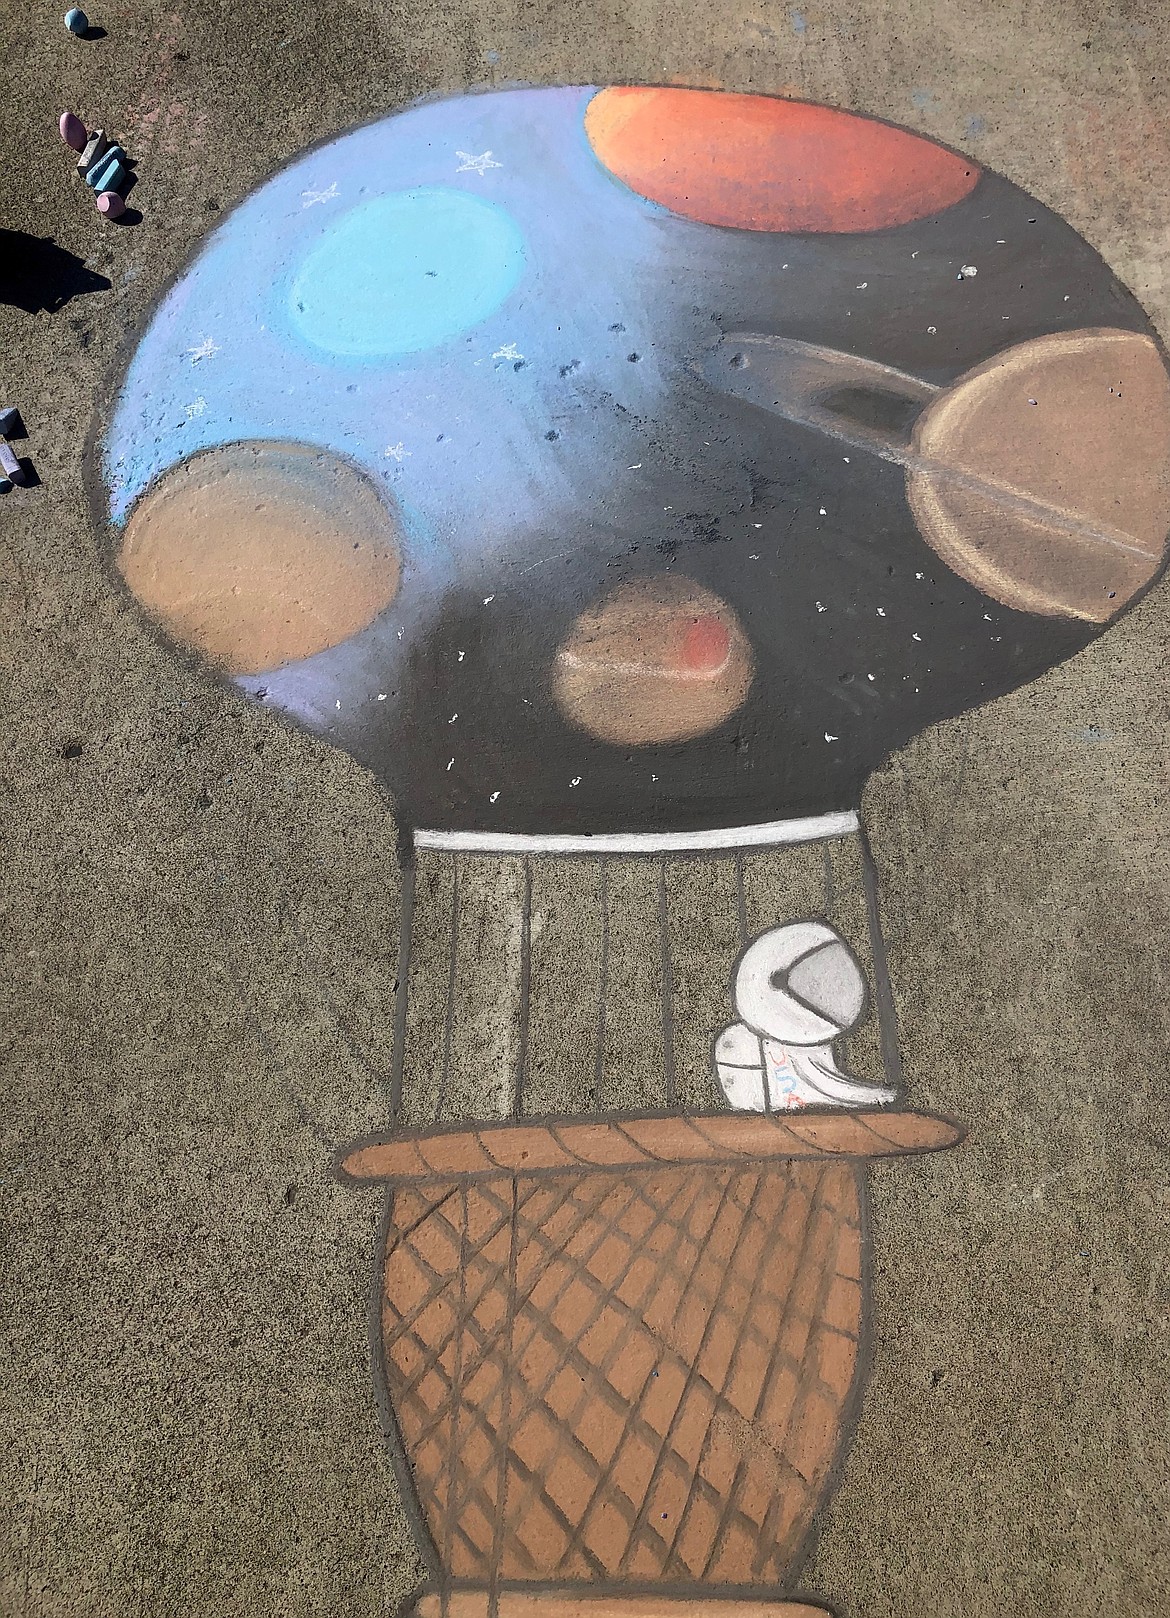 Artwork by Ryan Hays, 13, of Moses Lake, in chalk on driveway pavement.